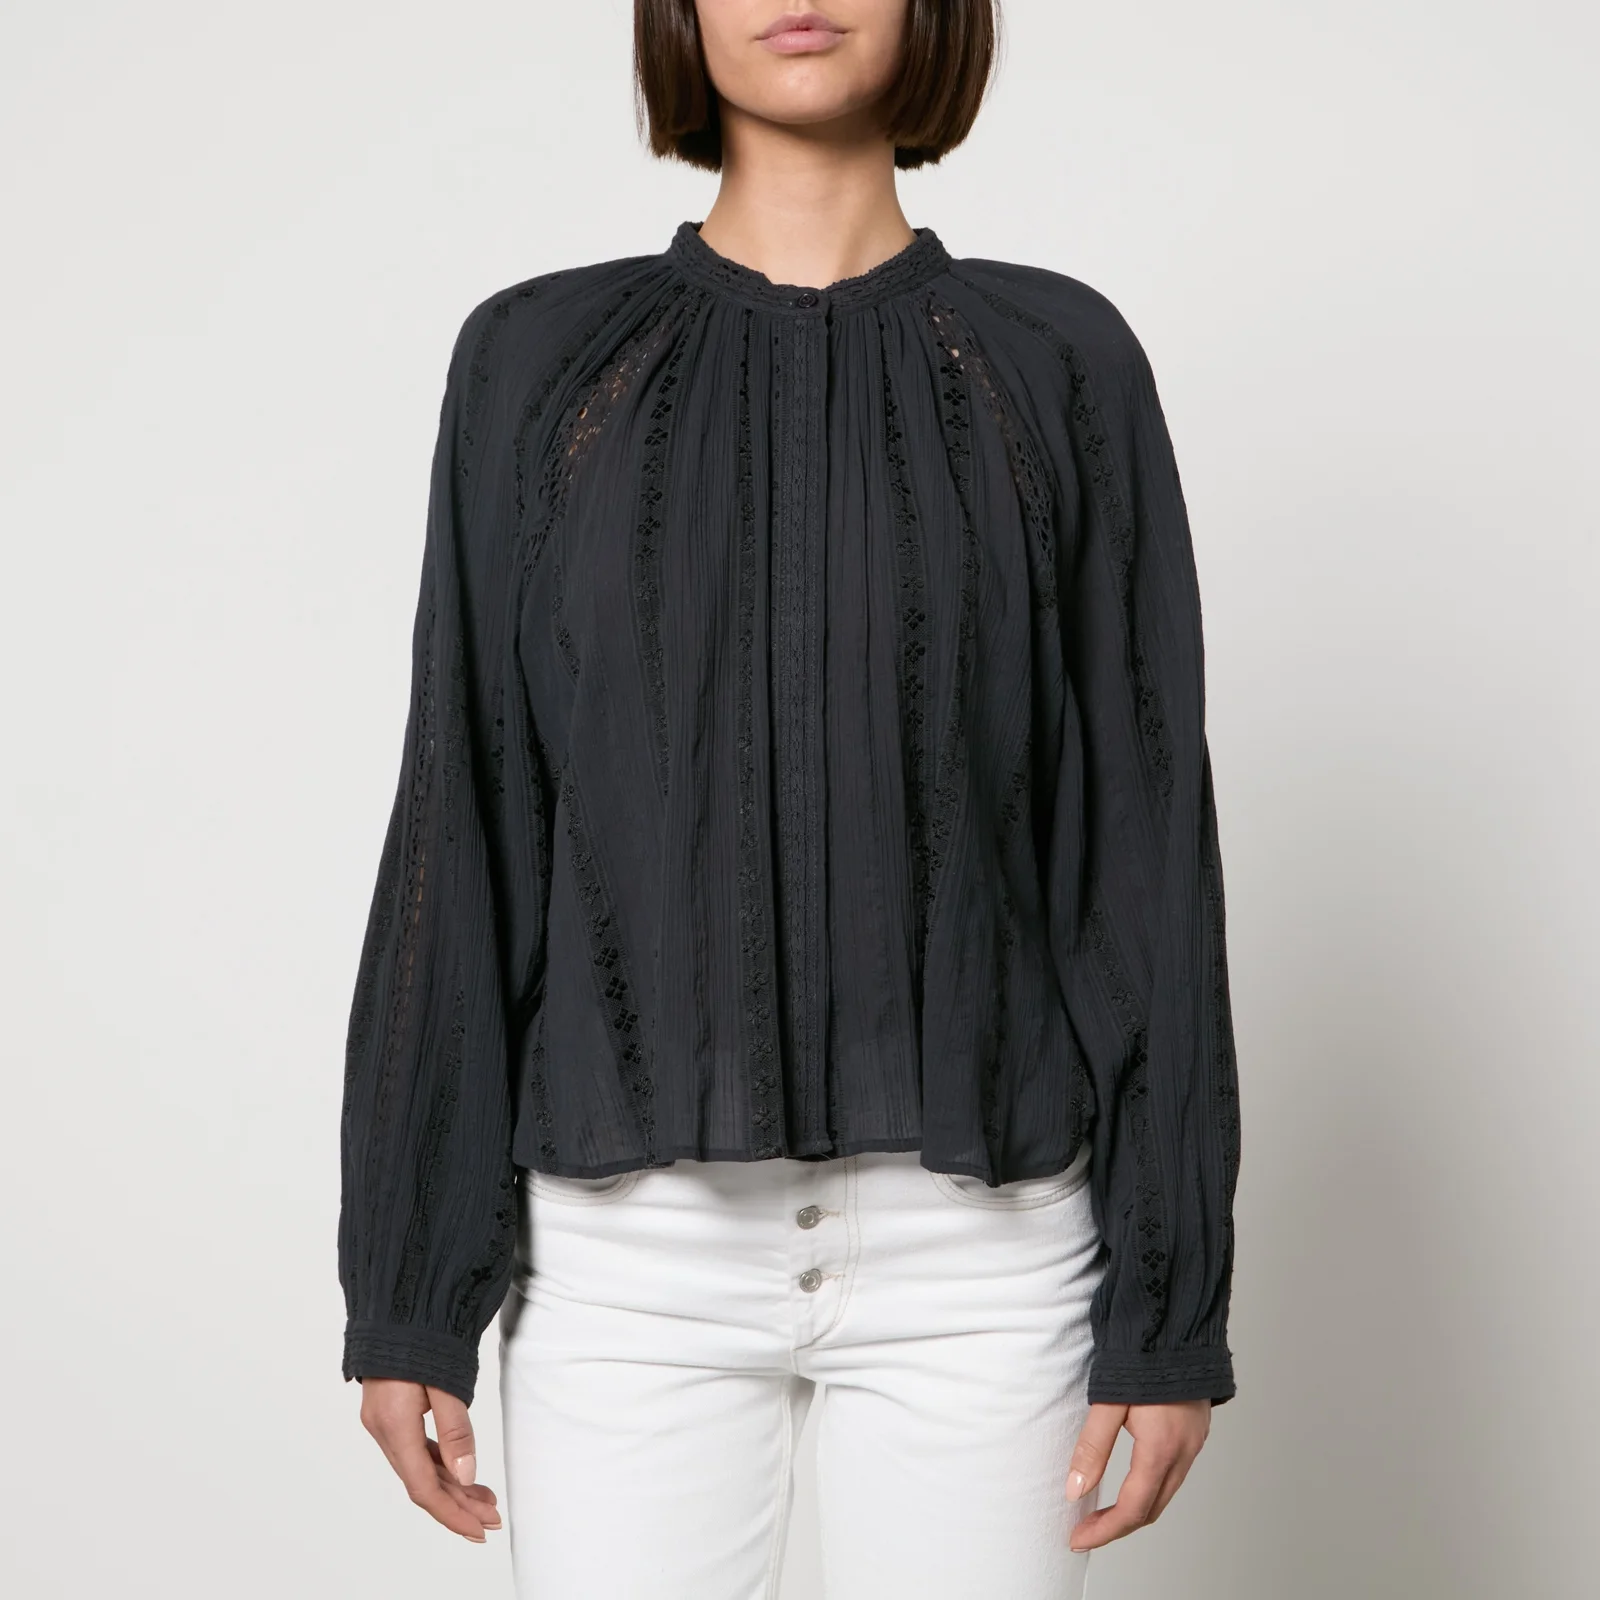 Marant Etoile Janelle Embroidered Broderie Anglaise Cotton Blouse Image 1